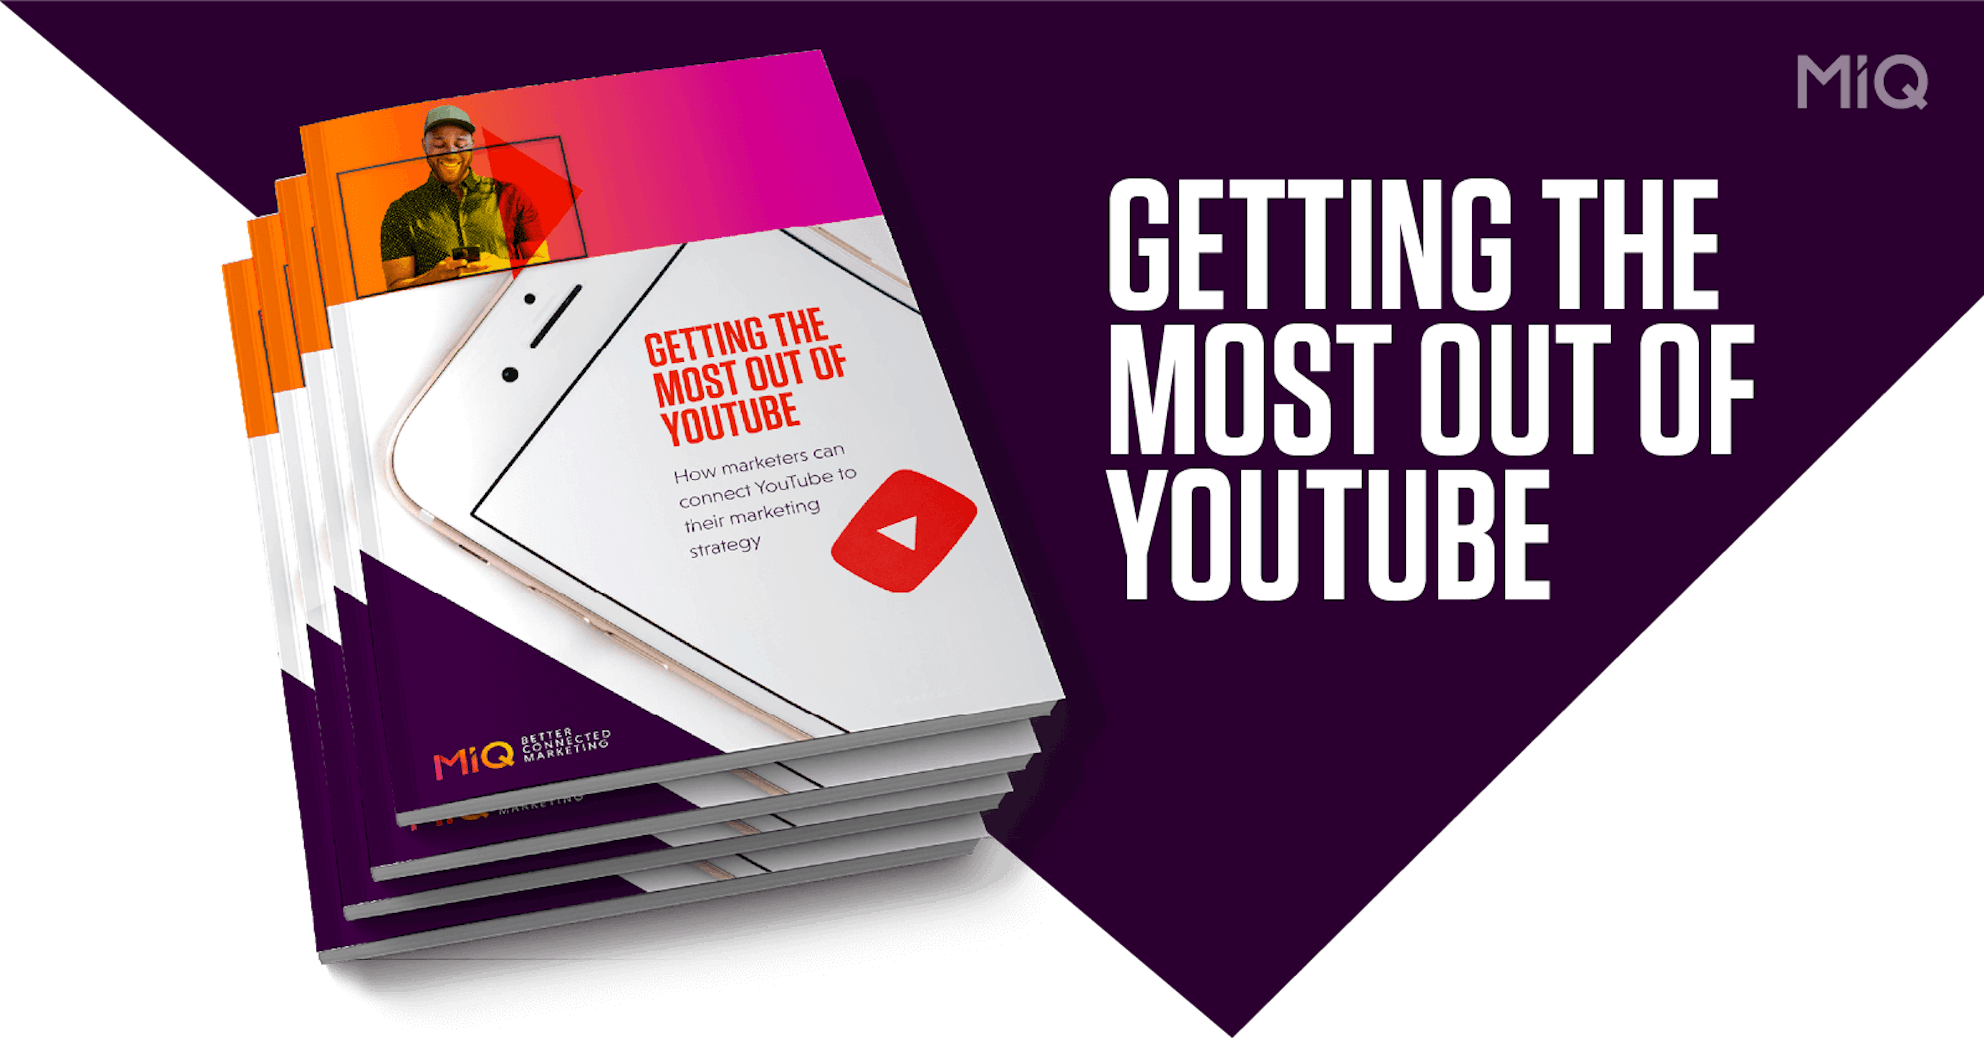 Getting the most out of YouTube